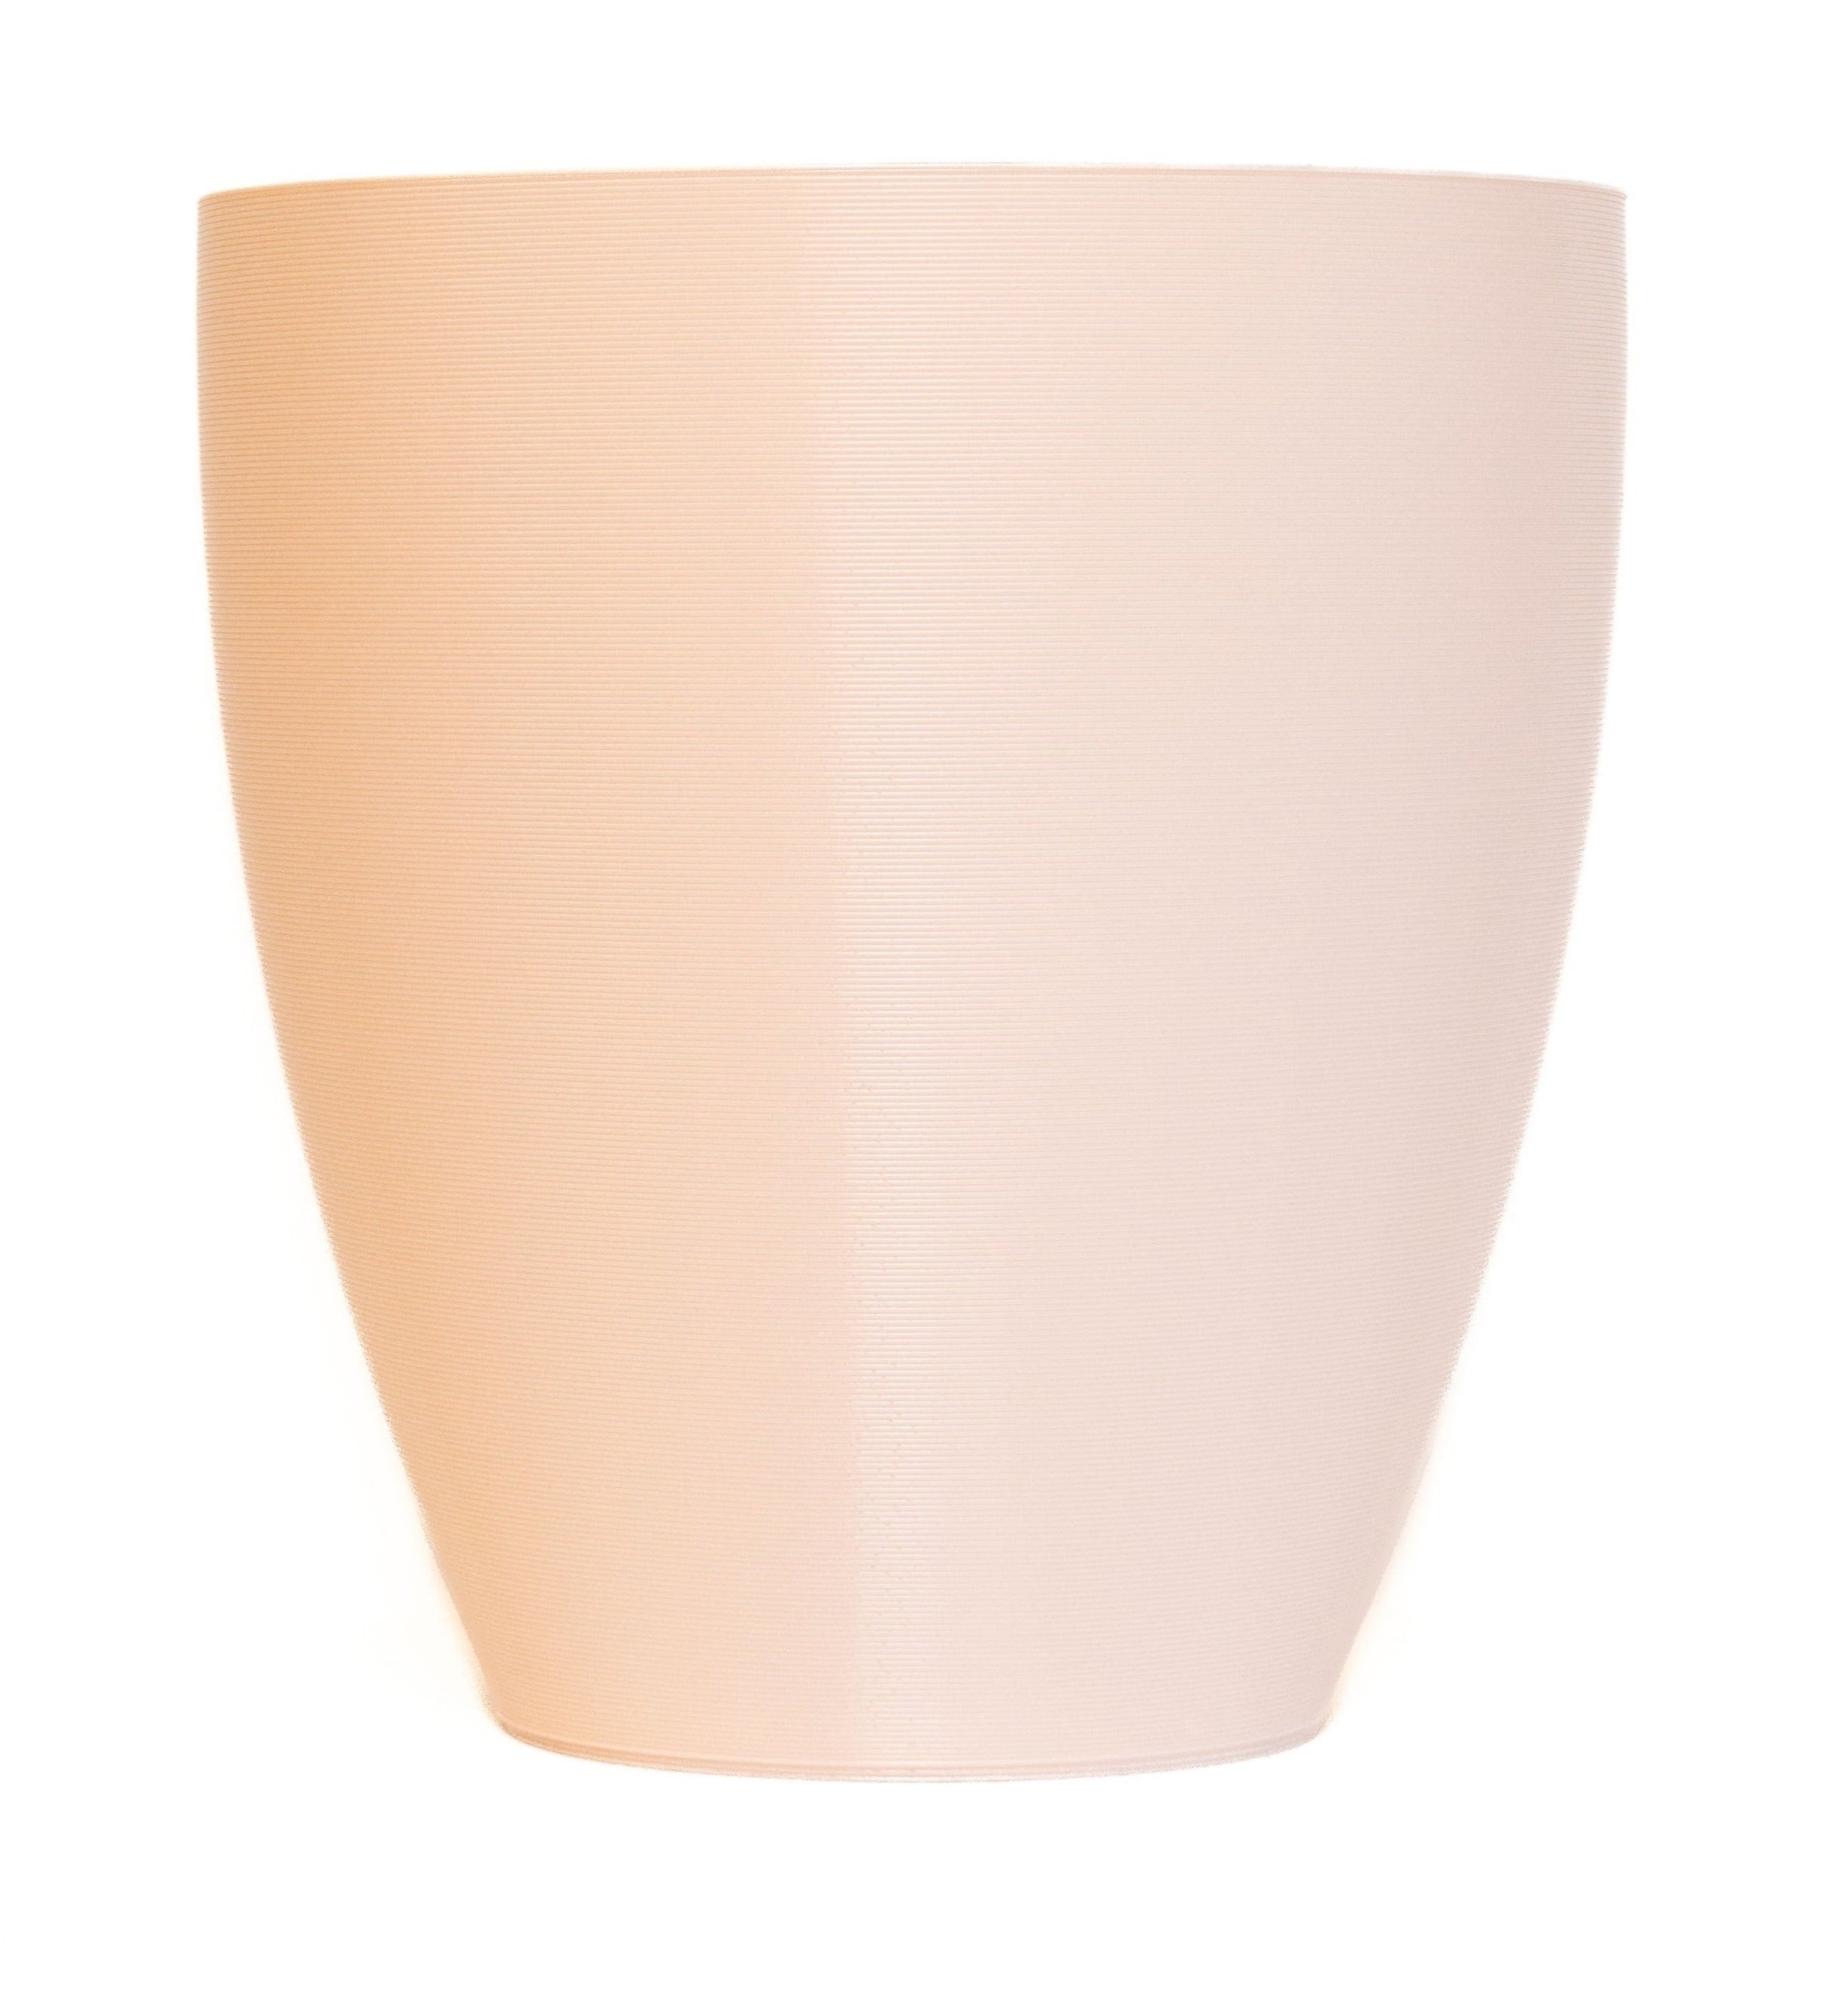 3D Waste basket Opaque Peach Oval